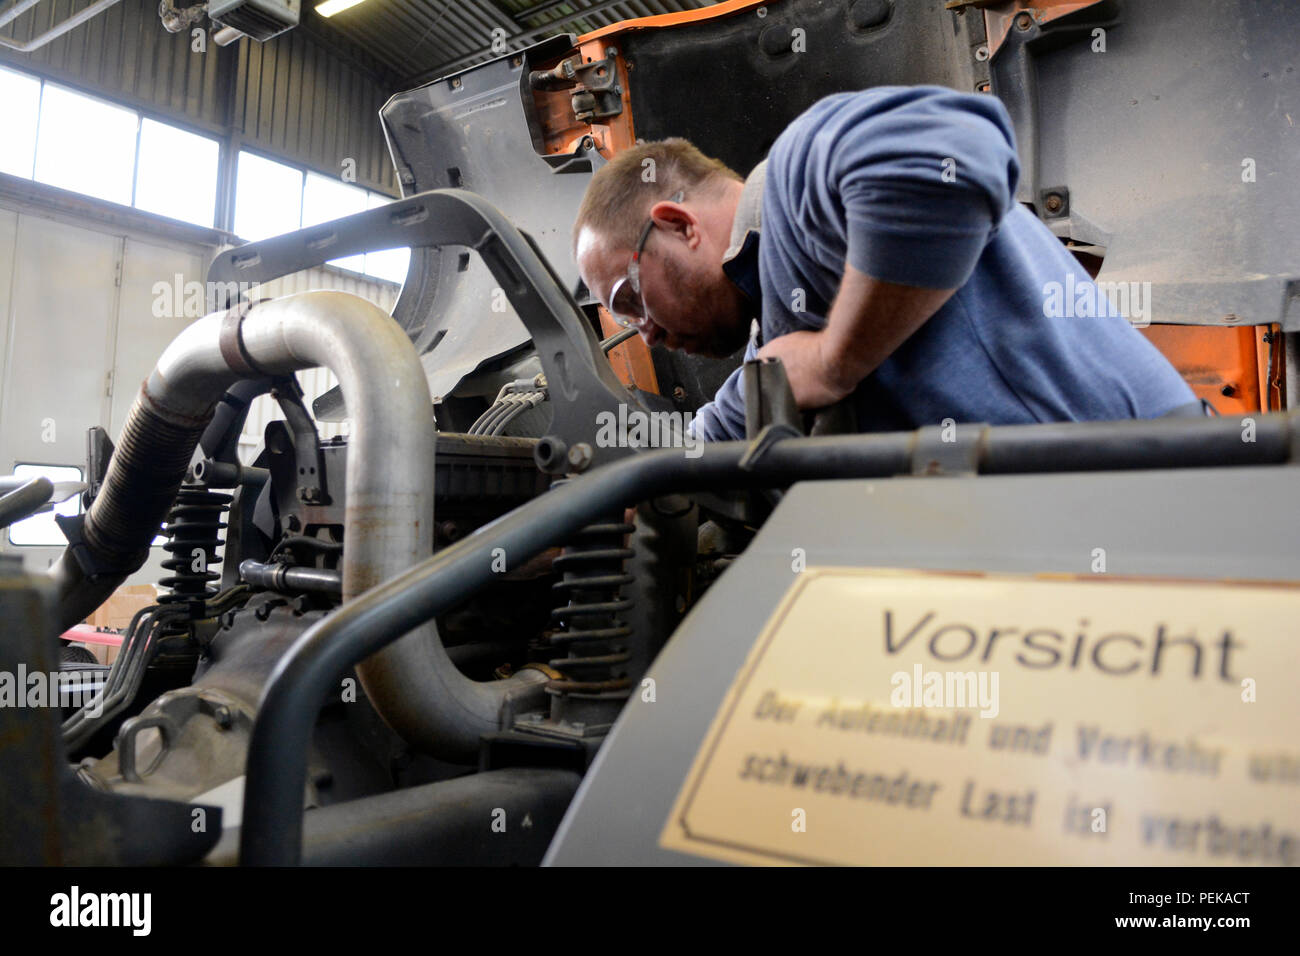 Hans-Juergen Fischer, a mechanic with the 6981st Civilian Support Group, 2nd Signal Brigade, fixes an engine on a cargo truck in the unit's motor pool Dec. 11, 2015 at Germersheim Army Depot, Germany. Stock Photo